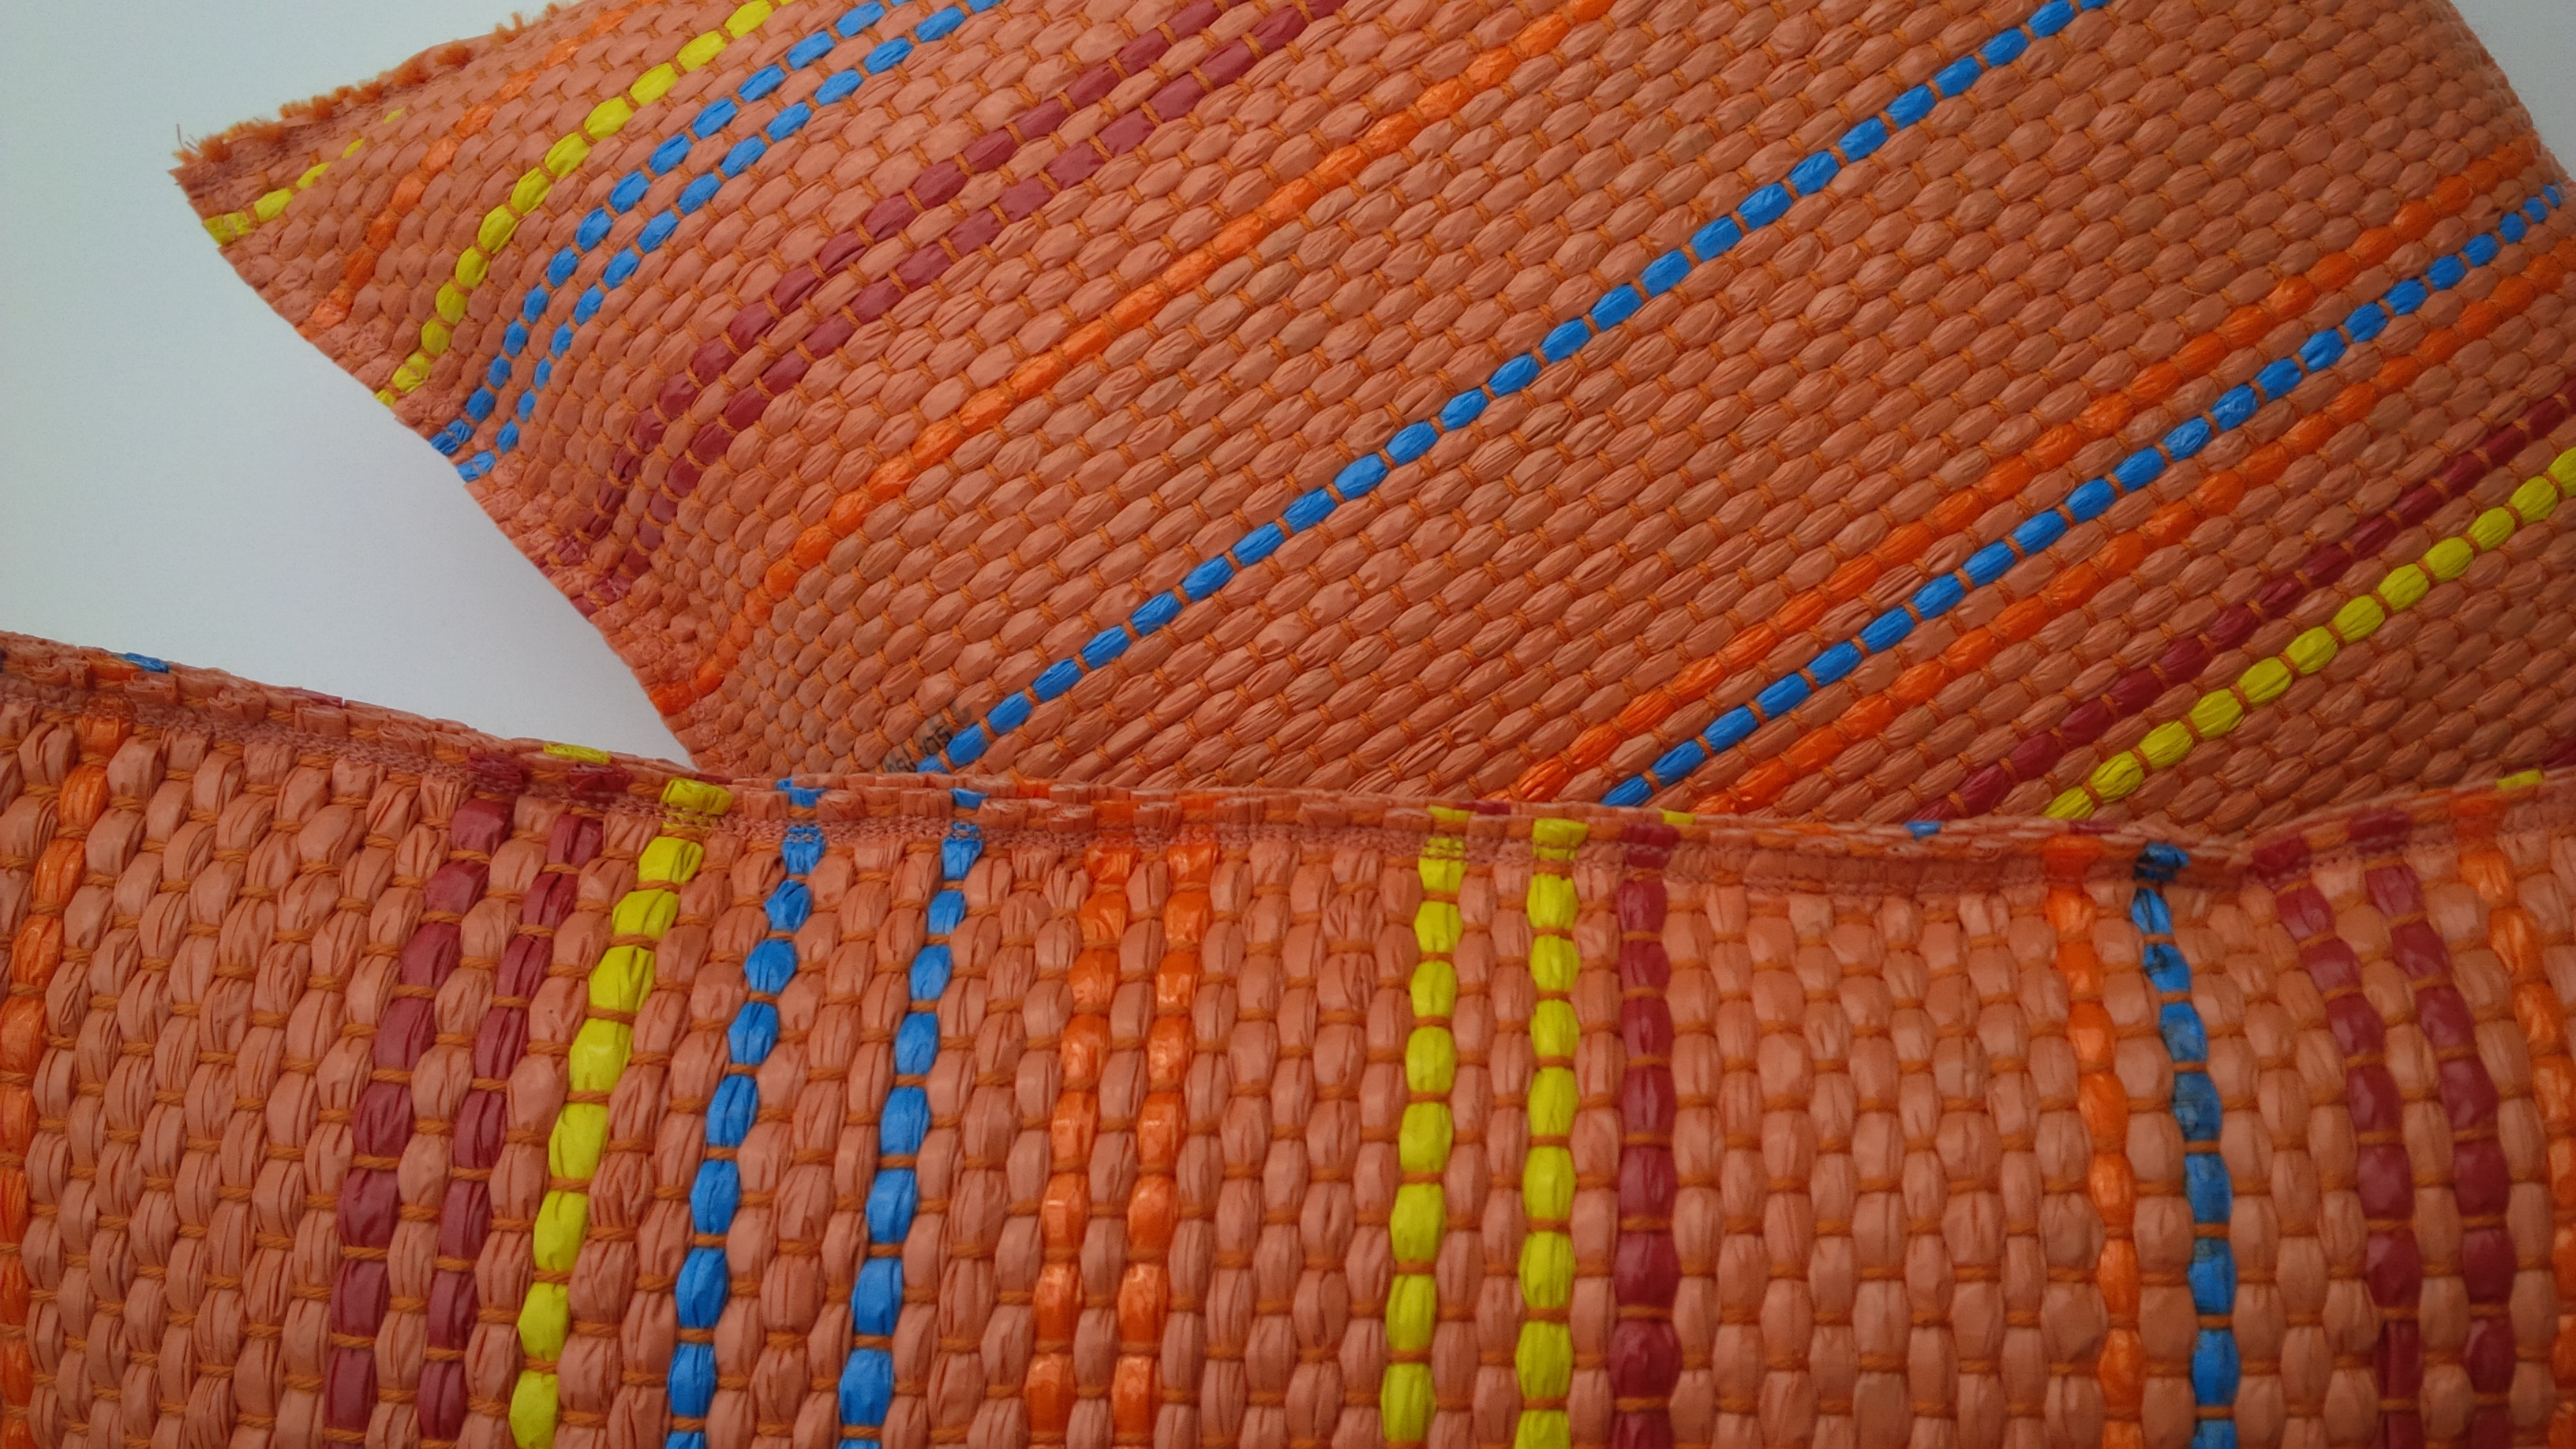 Orange pillow with blue, yellow and red